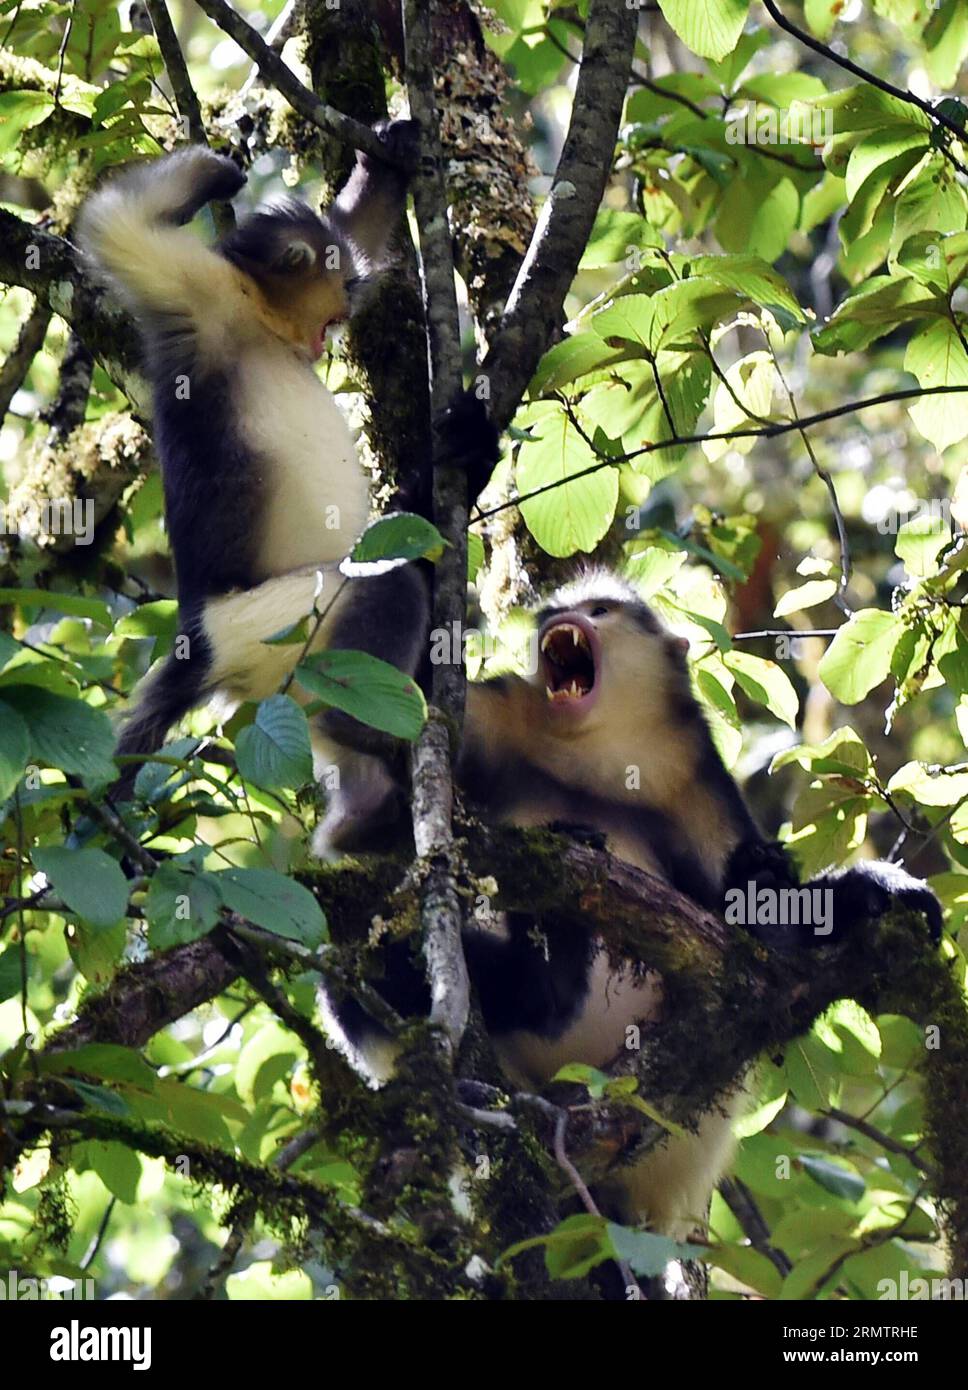 (140917) -- DEQUN,  -- Two black snub-nosed monkeys (Rhinopithecus bieti) are seen on a tree branch in the Baimang Mountain National Natural Reserve in the Tibetan Autonomous Prefecture of Deqen in southwest China s Yunnan Province, Sept. 16, 2014. The population of black snub-nosed monkeys within the Baimang Mountain National Natural Reserve has expanded by about 50 as of September. In August 2013, a 5.1-magnitude earthquake in Deqen had exerted adverse effects to the habitats of black snub-nosed monkeys here. Their living environments have been restored under protective efforts that lasted f Stock Photo